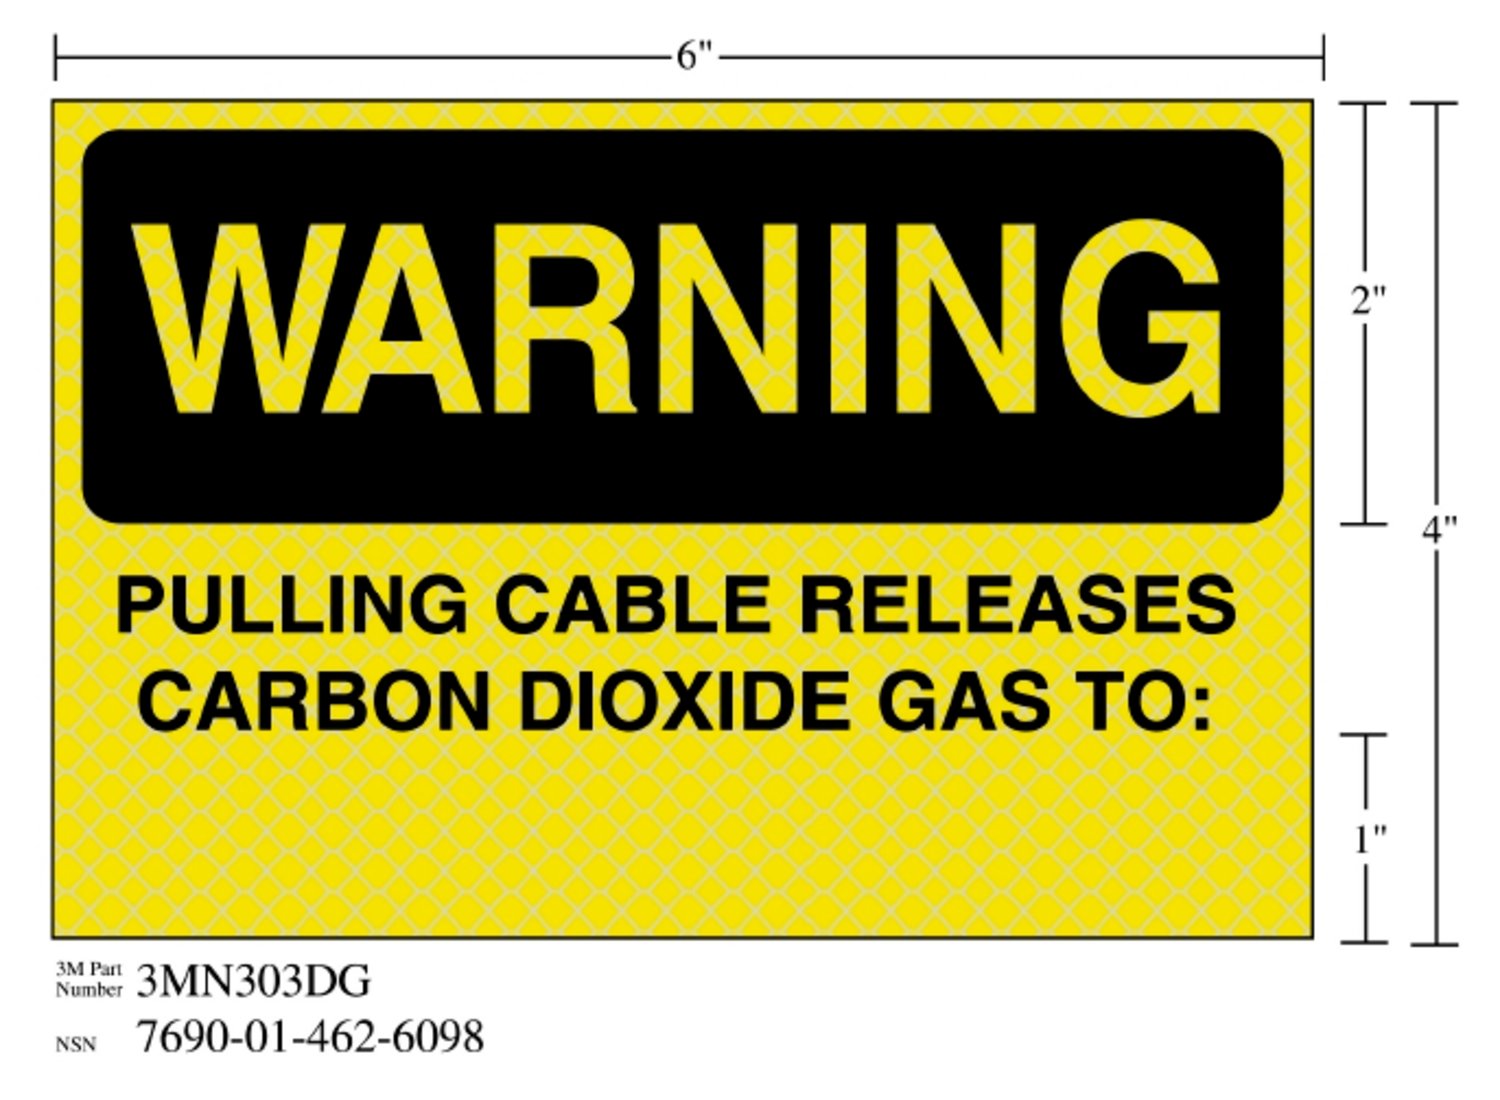 7010317787 - 3M Diamond Grade Fire Fighting Sign 3MN303DG, "WARNING…TO", 6 in x 4
in, 10/Package